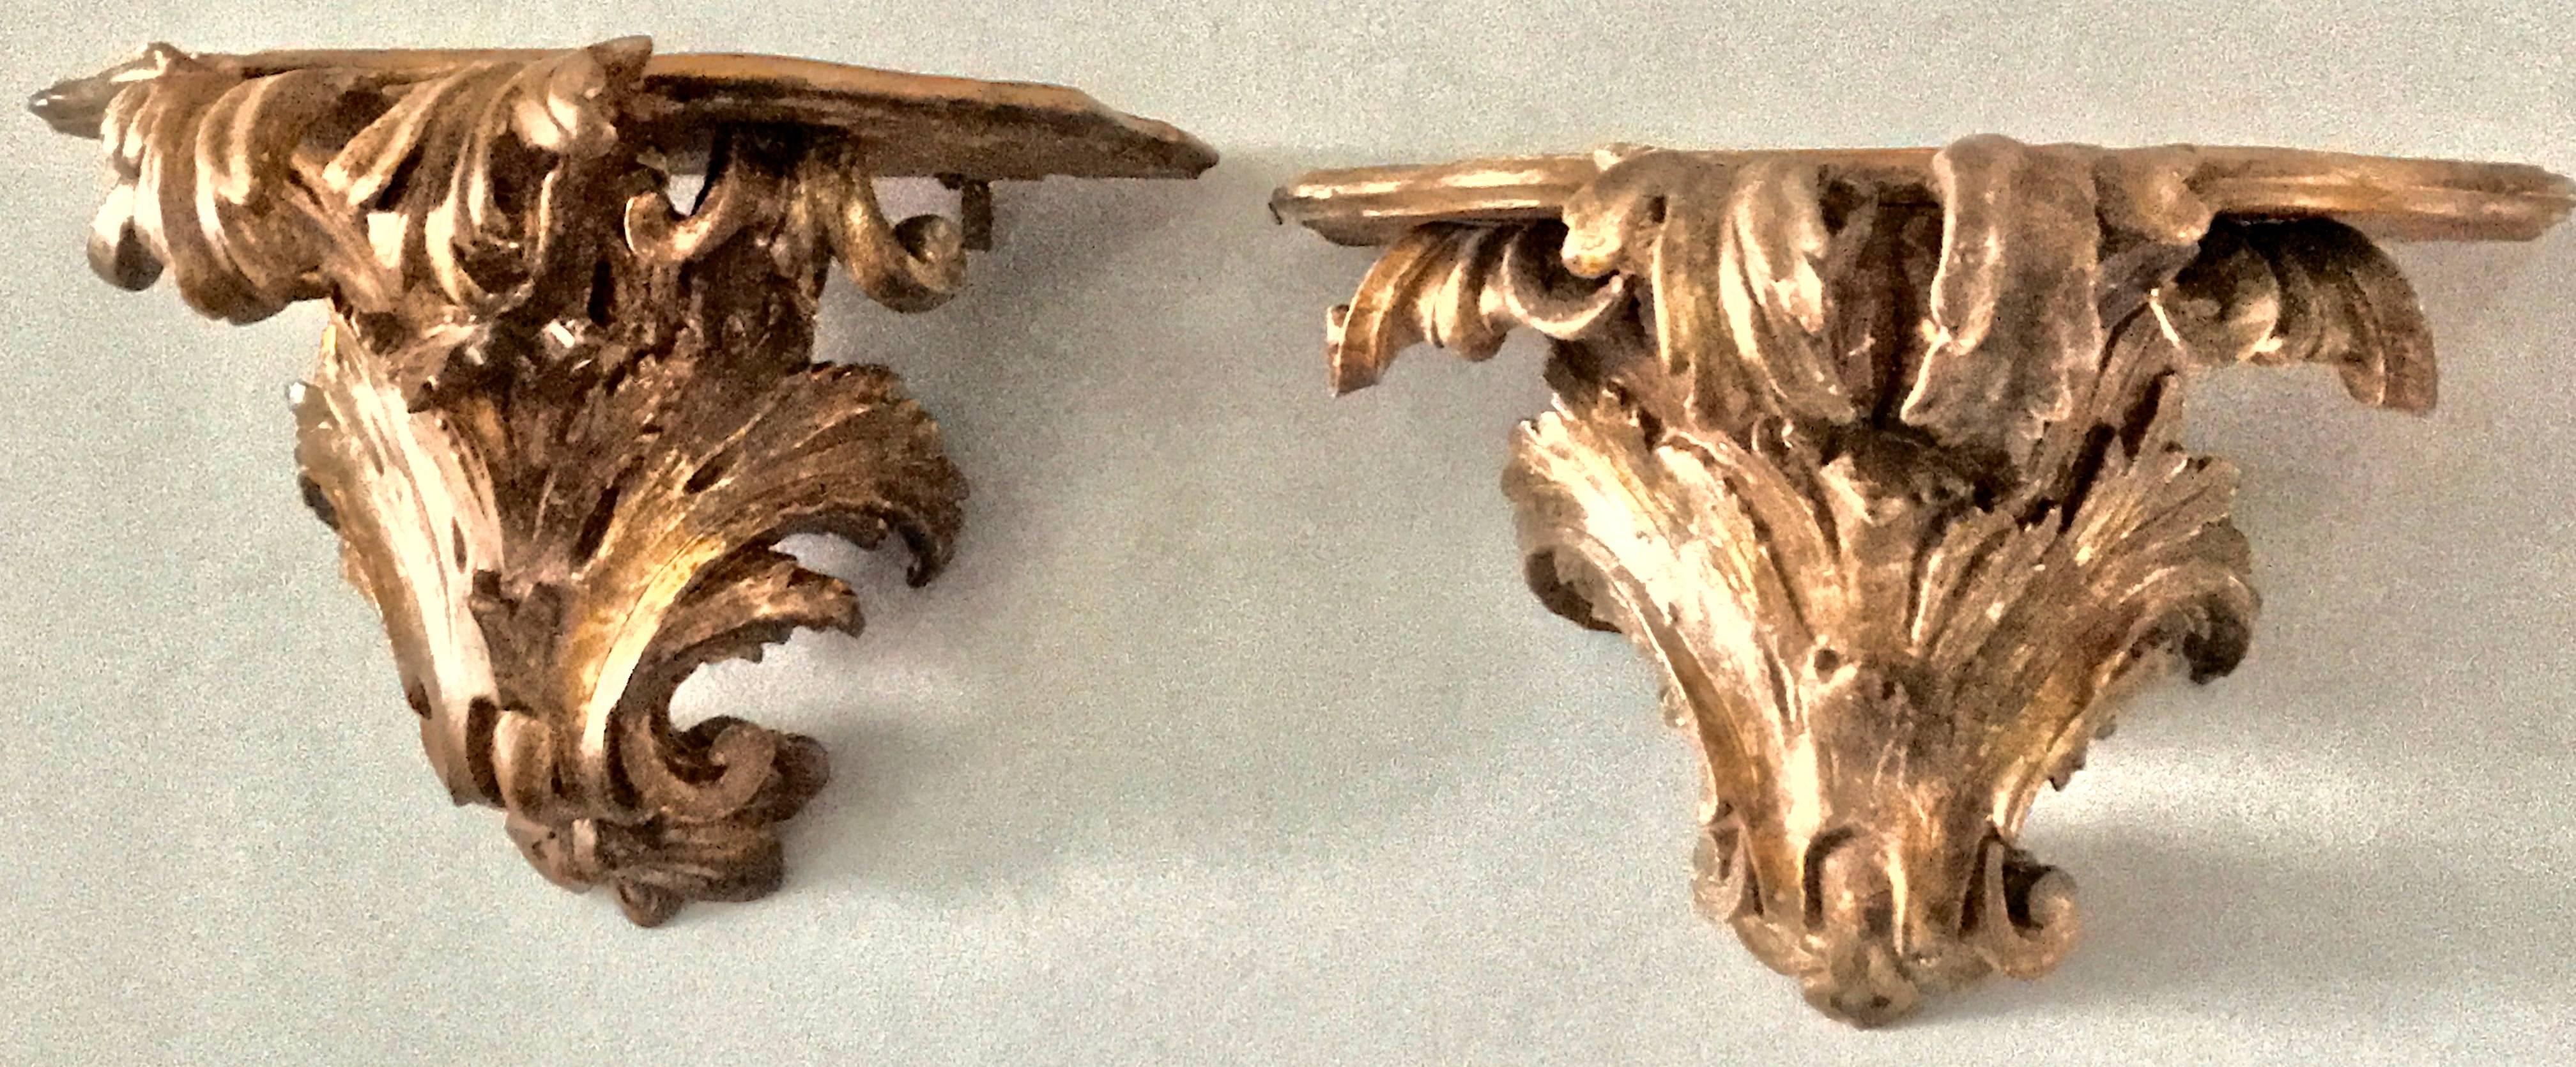 Pair large Italian gilt-carved brackets. Pair of gilt-carved brackets with rich silvered-gold patina and faux marble tops, Italy, circa 1770s
Dimensions: 20